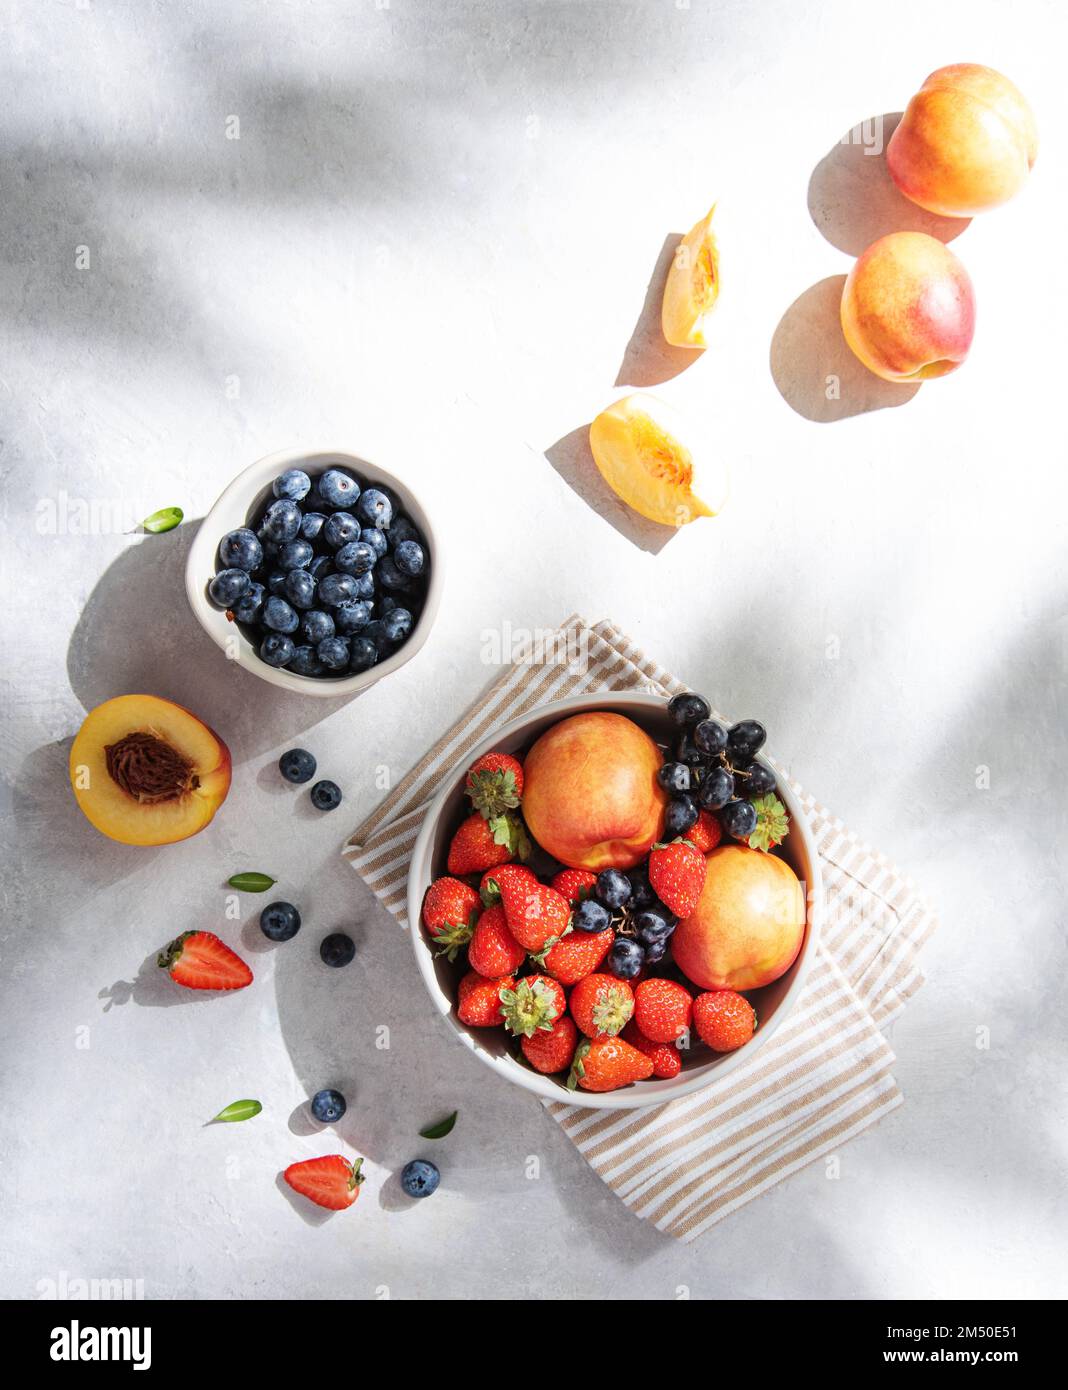 Fresh organic summer berries and fruits of strawberries, blueberries, peaches and grapes in a white plate on a light background with morning shadow. T Stock Photo